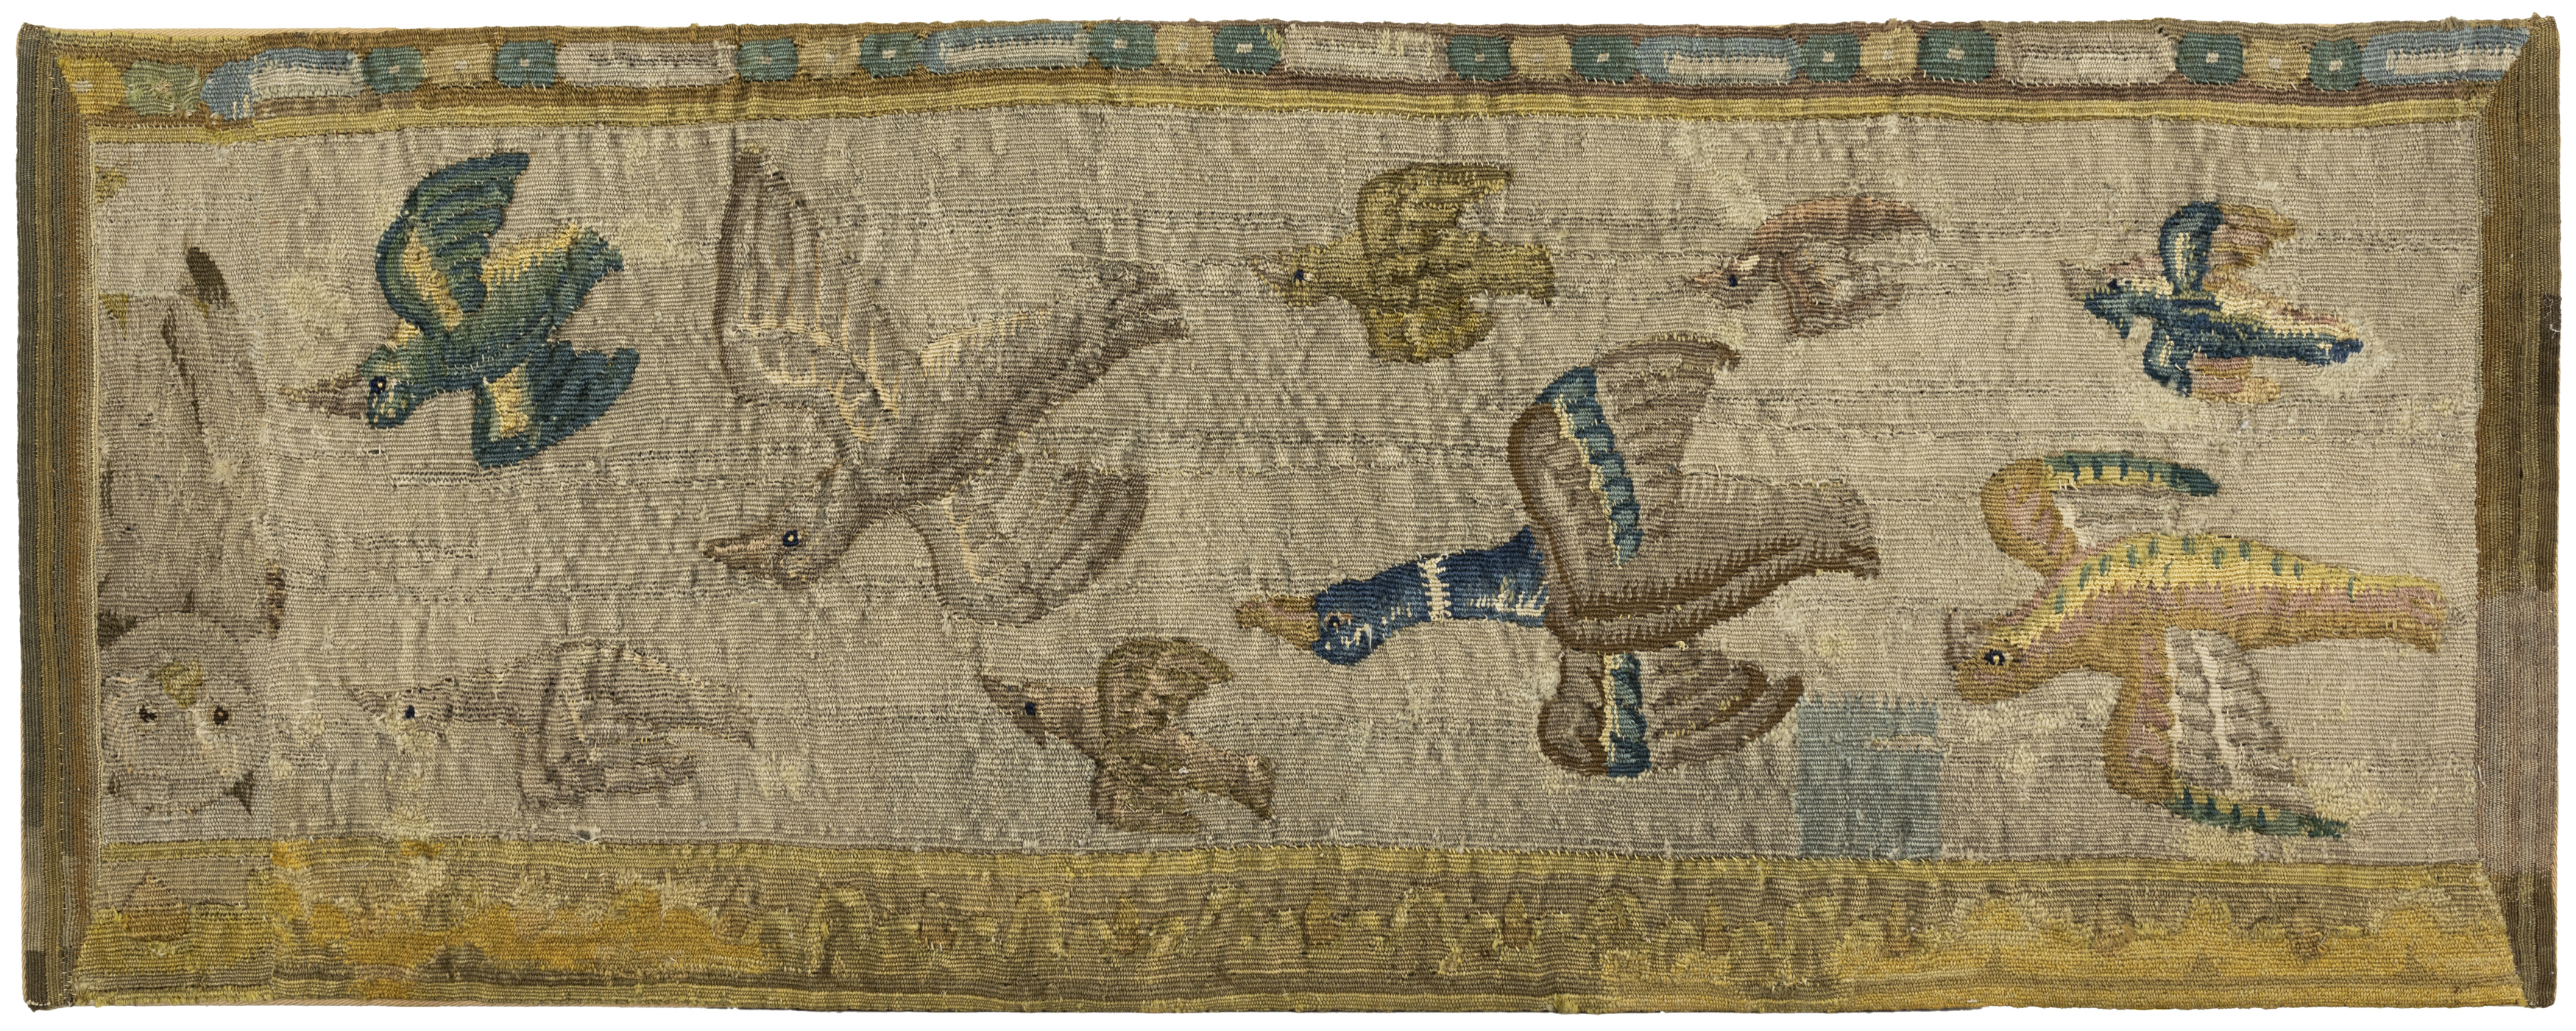 Three Flemish tapestry border fragments, 17th century, Woven in wools and silks, depicting flying... - Image 4 of 4